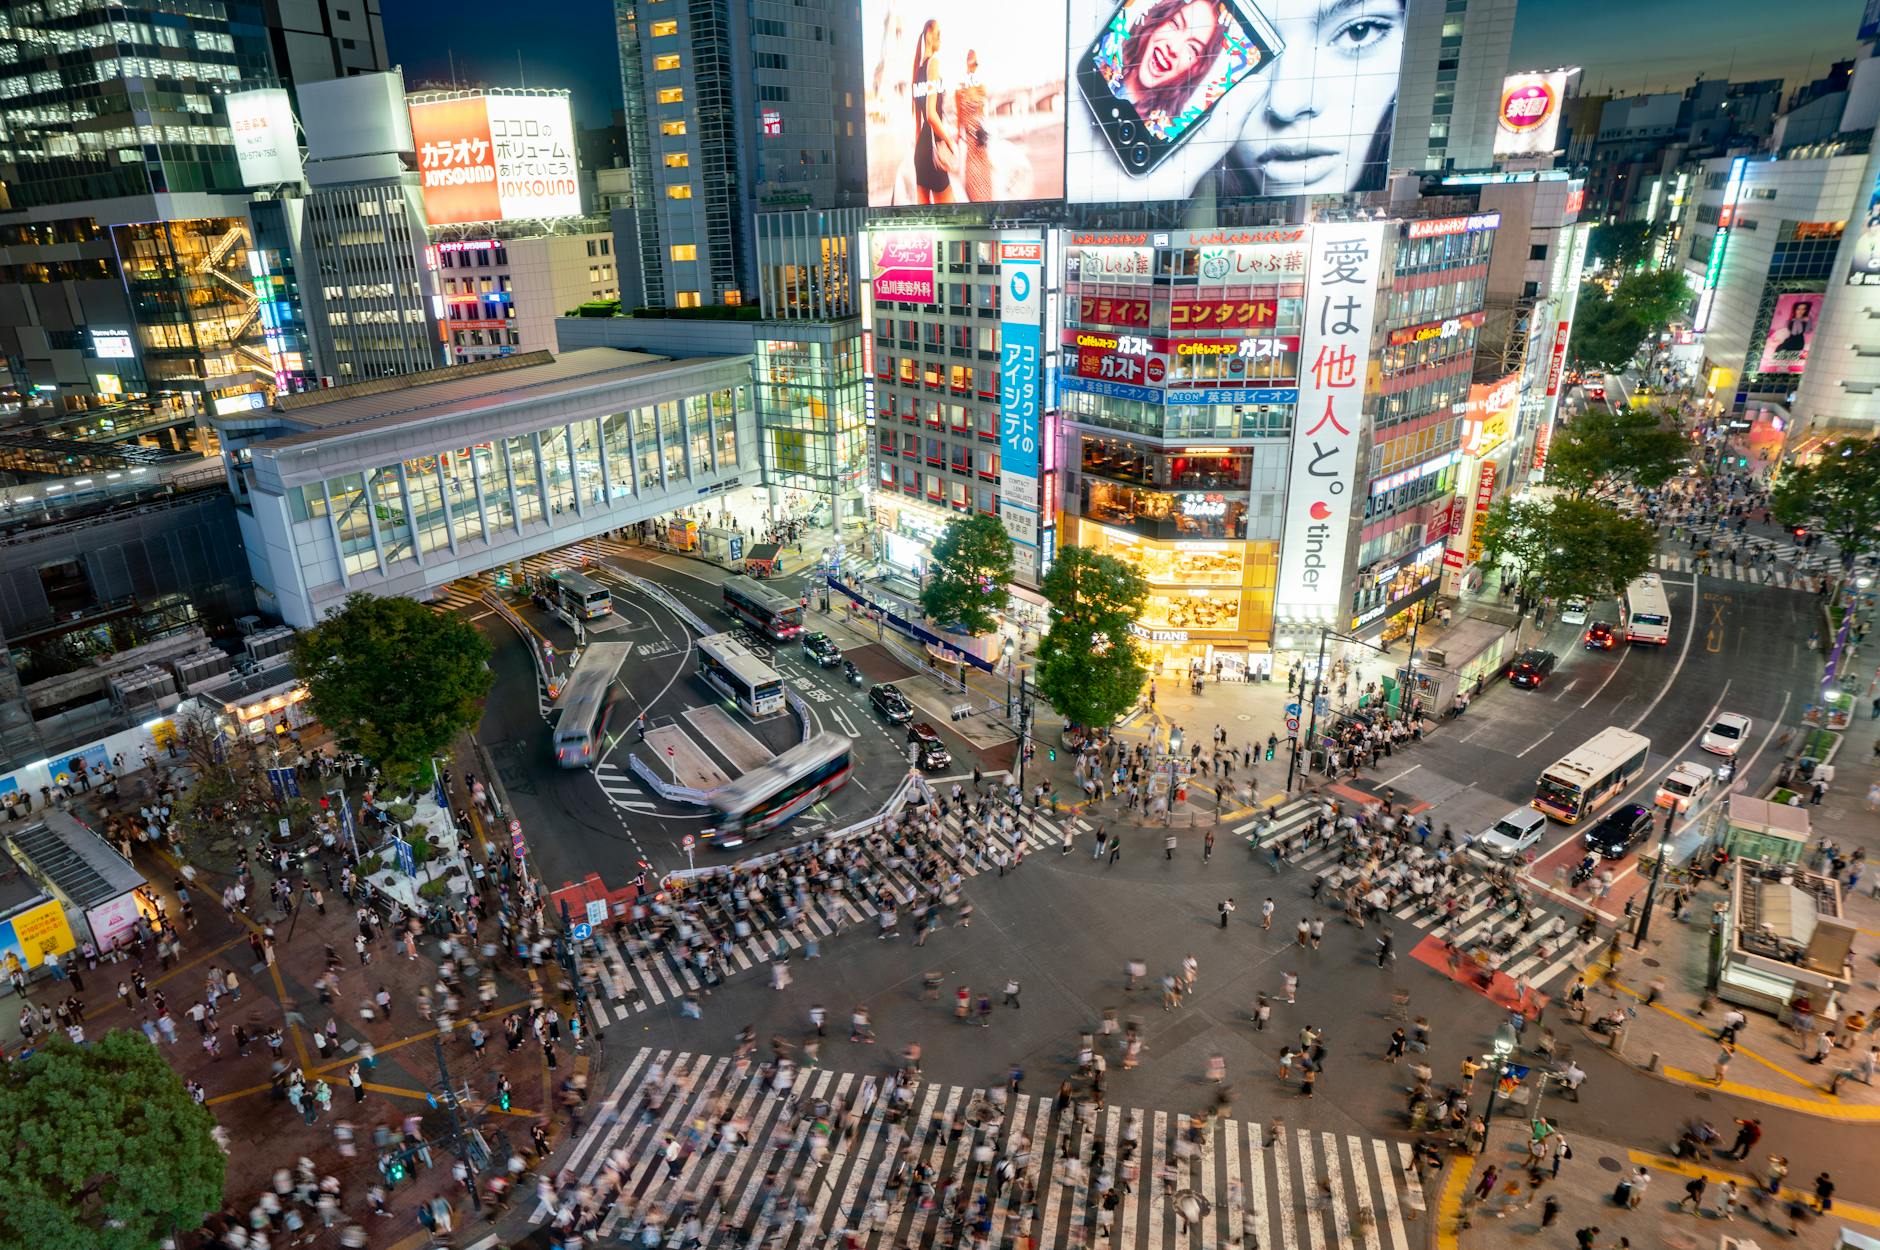 Crowds of Pedestrians at Tokyo Famous Shibuya Crossing